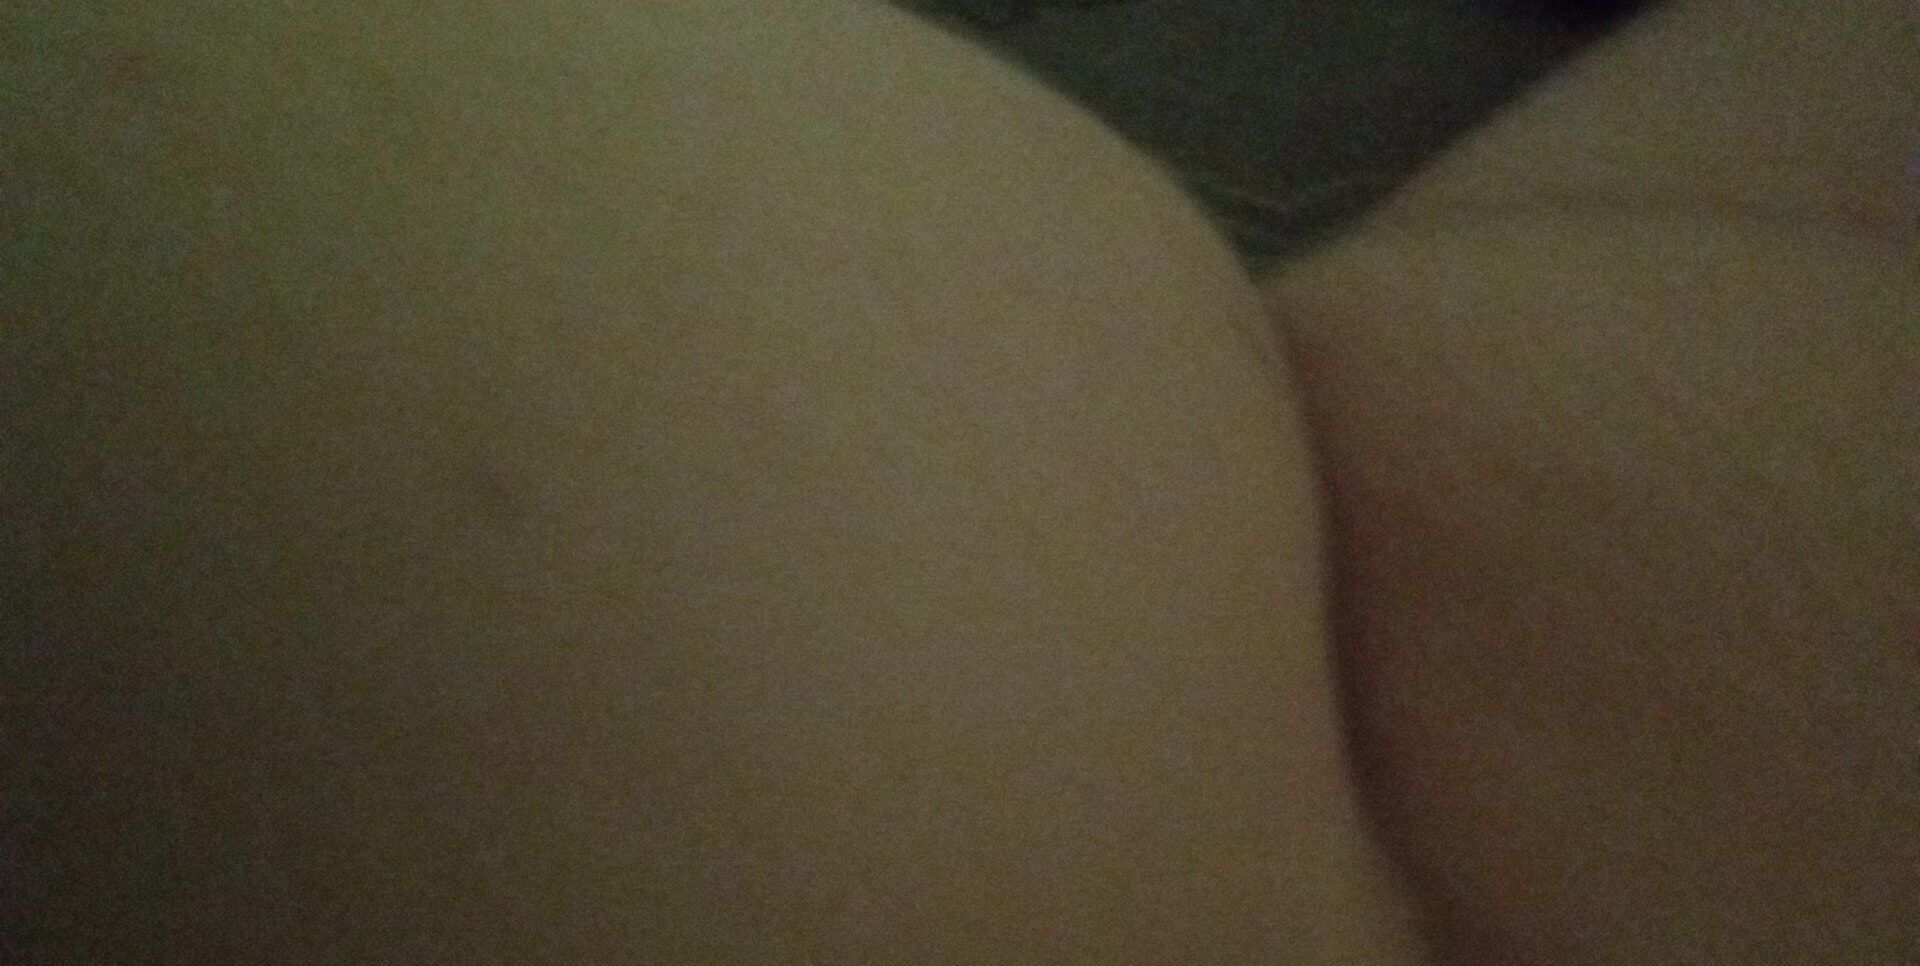 Would you like to fuck my ass